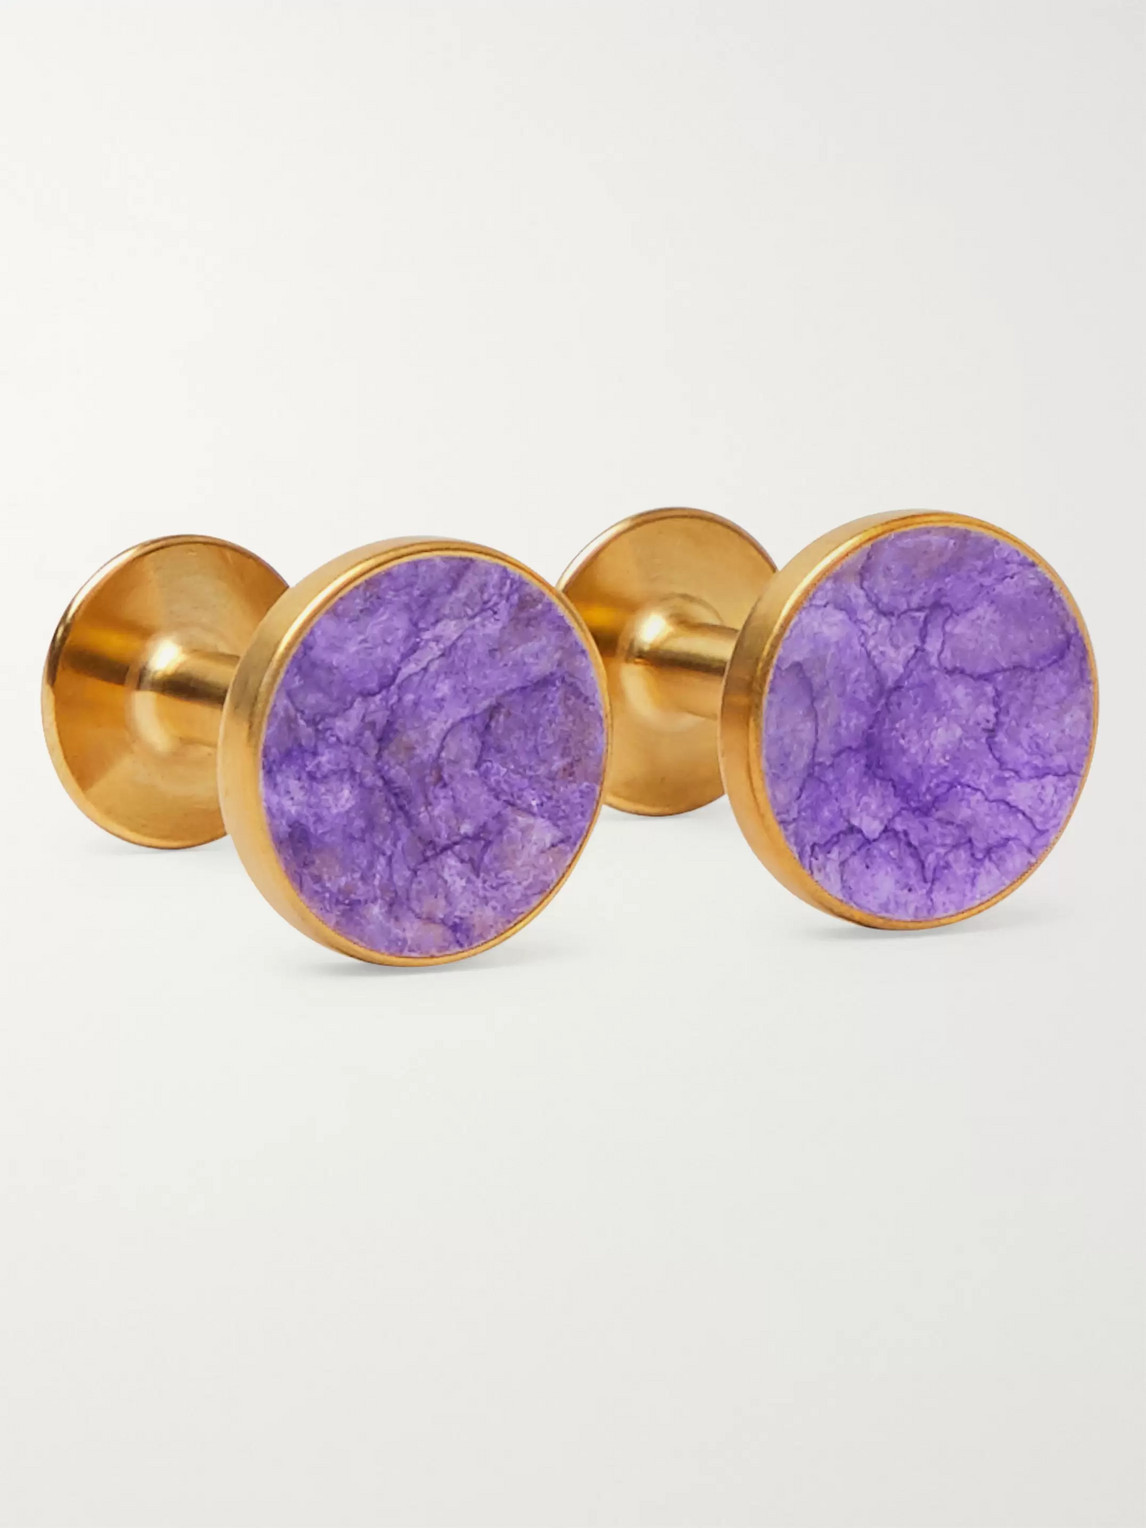 Alice Made This Bayley Quink Patina Brass Cufflinks In Purple